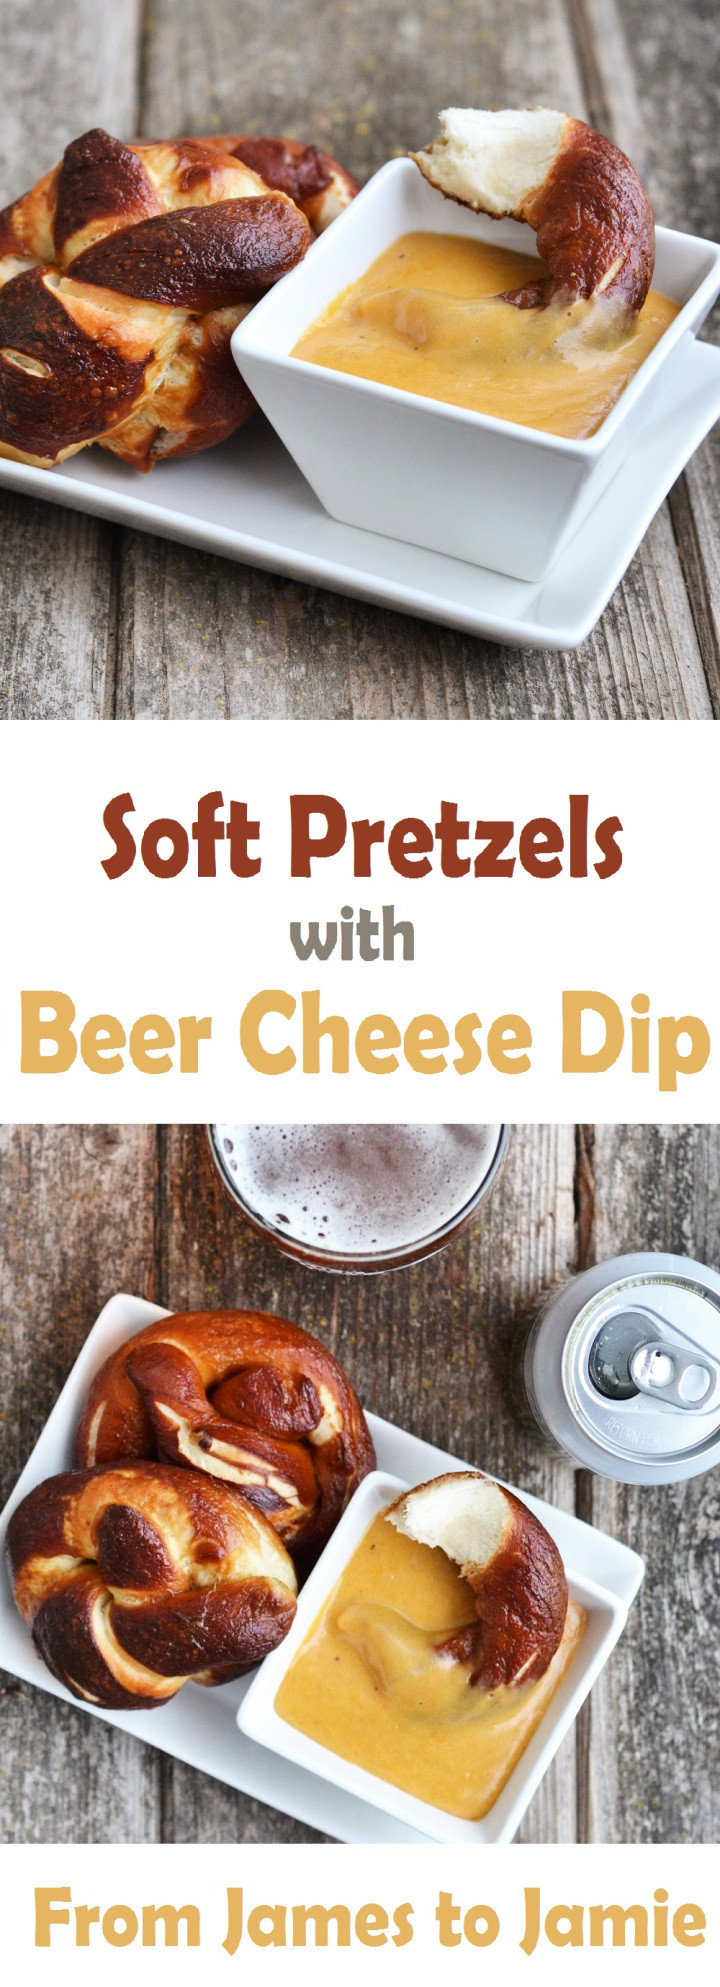 Beer Cheese Dip And Pretzels
 Soft Pretzels with Beer Cheese Dip – From James to Jamie